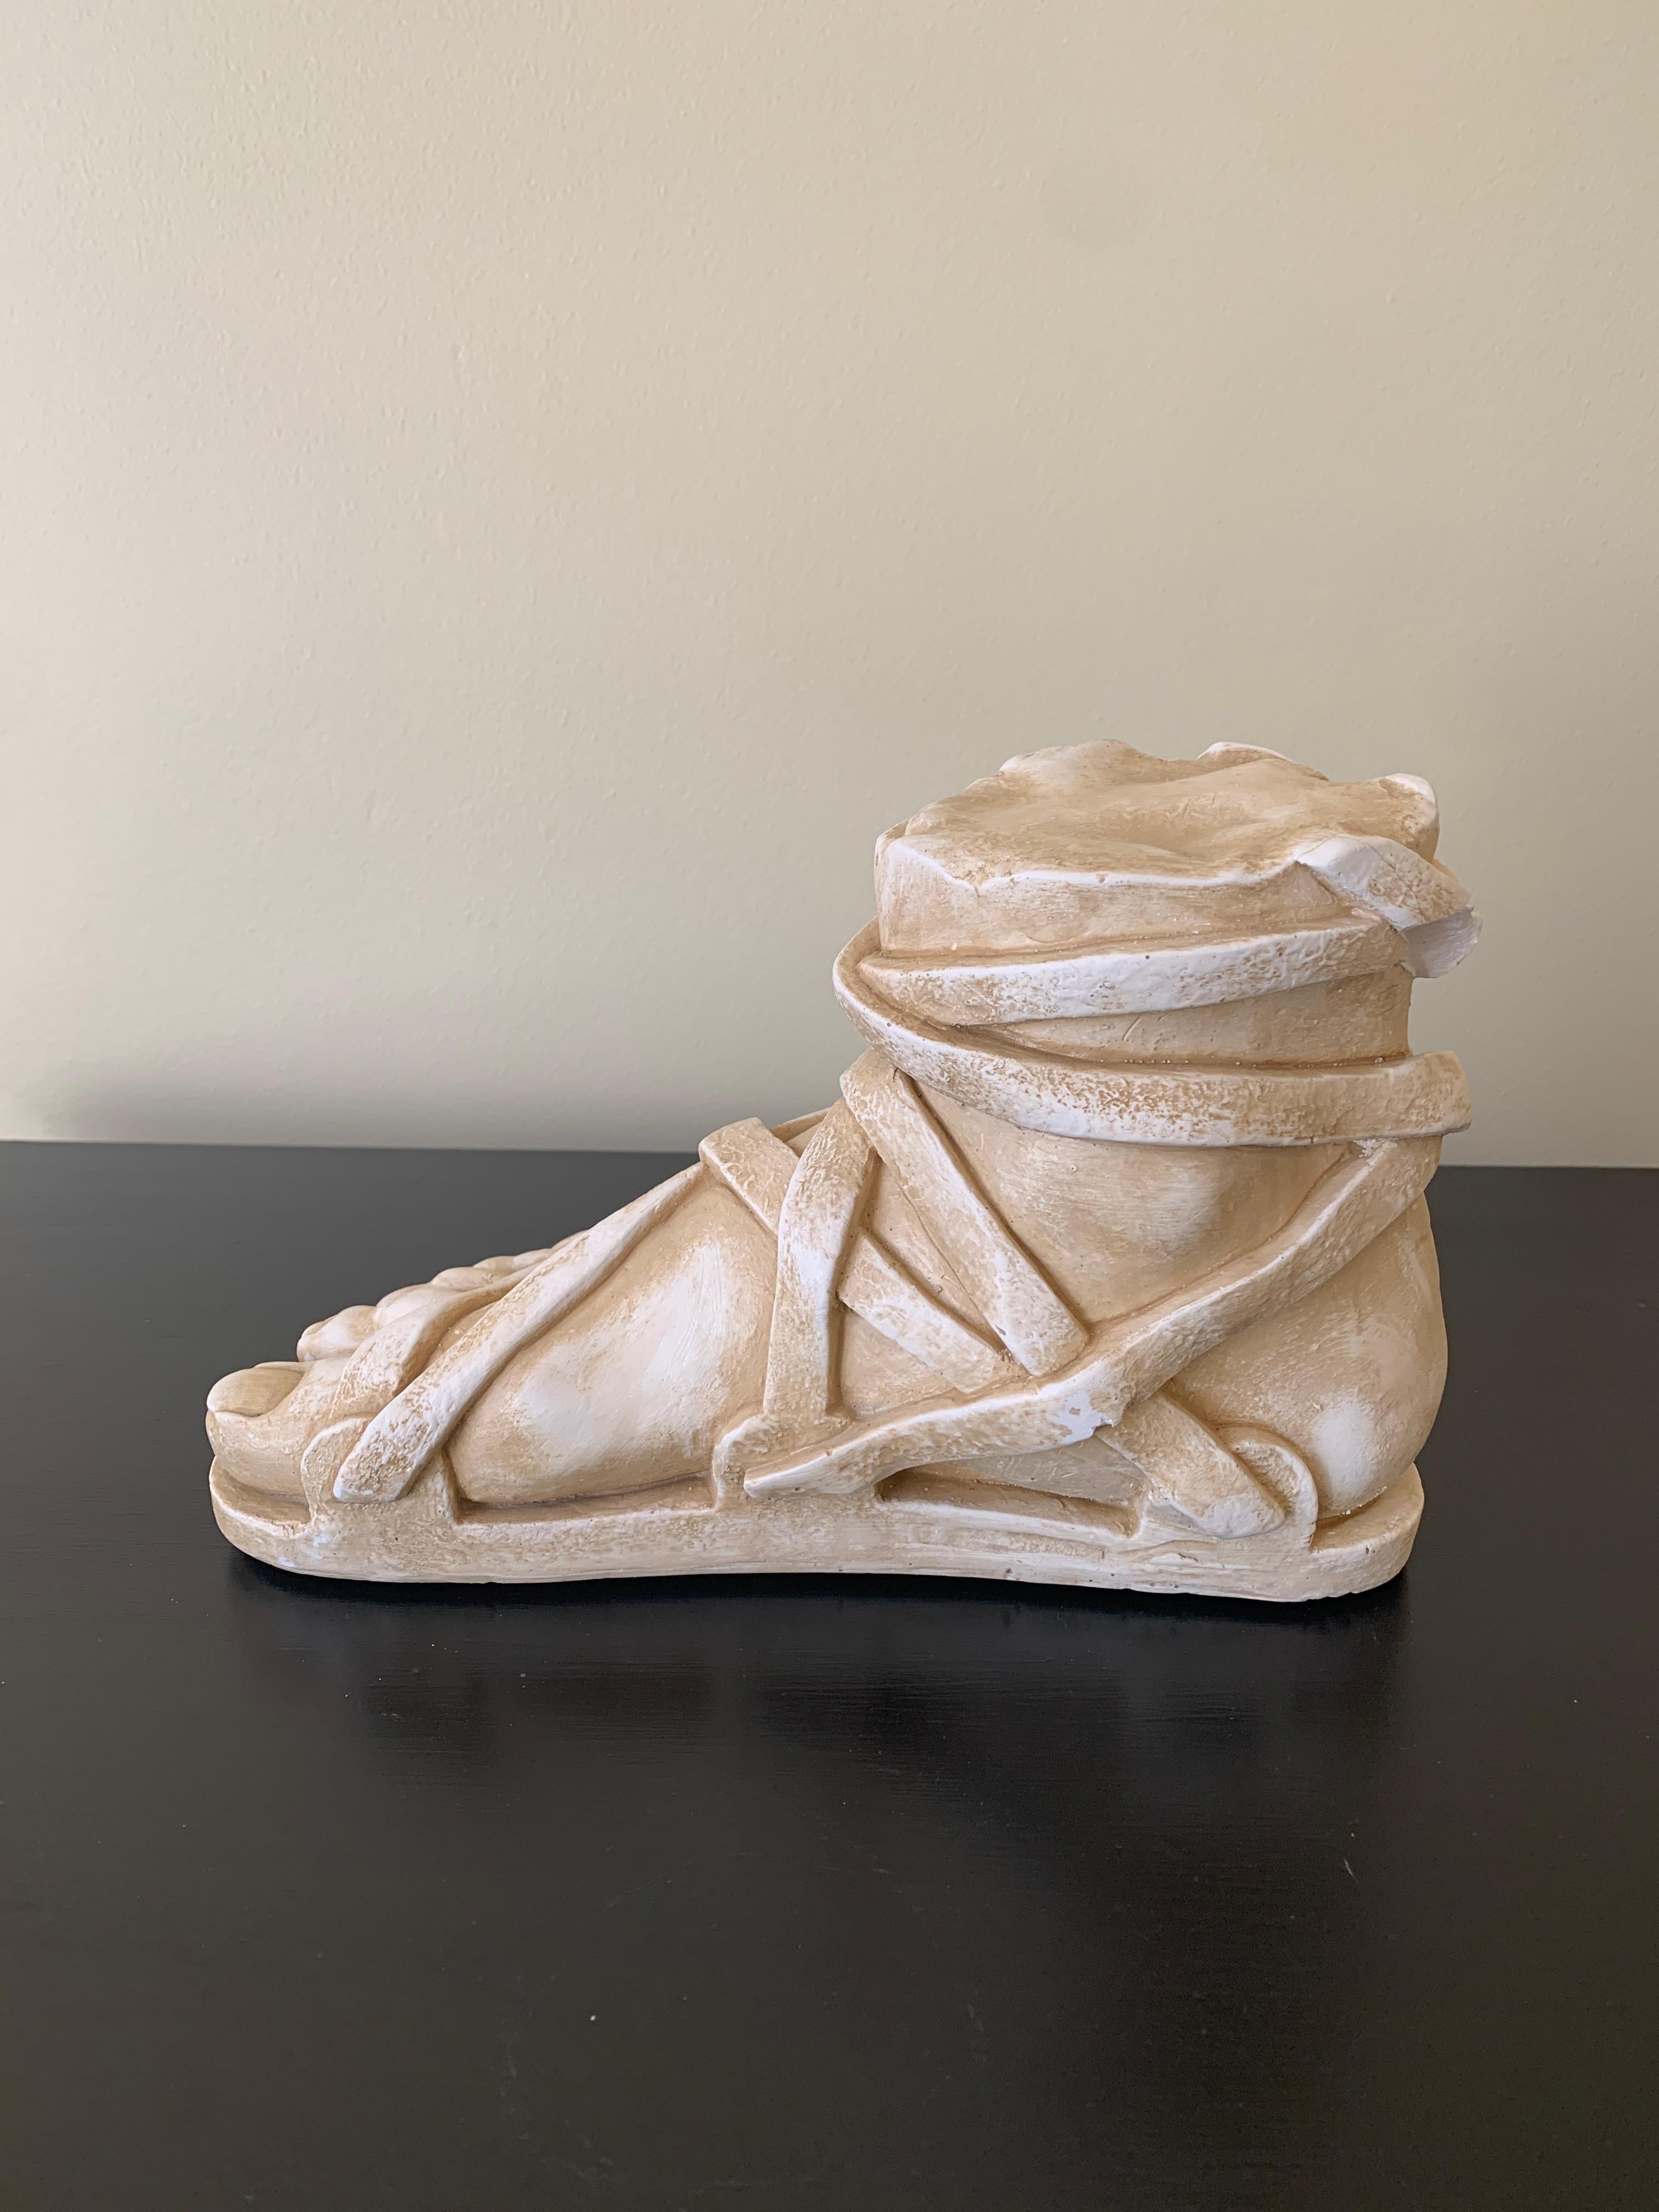 Grand Tour Style Greek or Roman Plaster Foot Sculpture For Sale 1